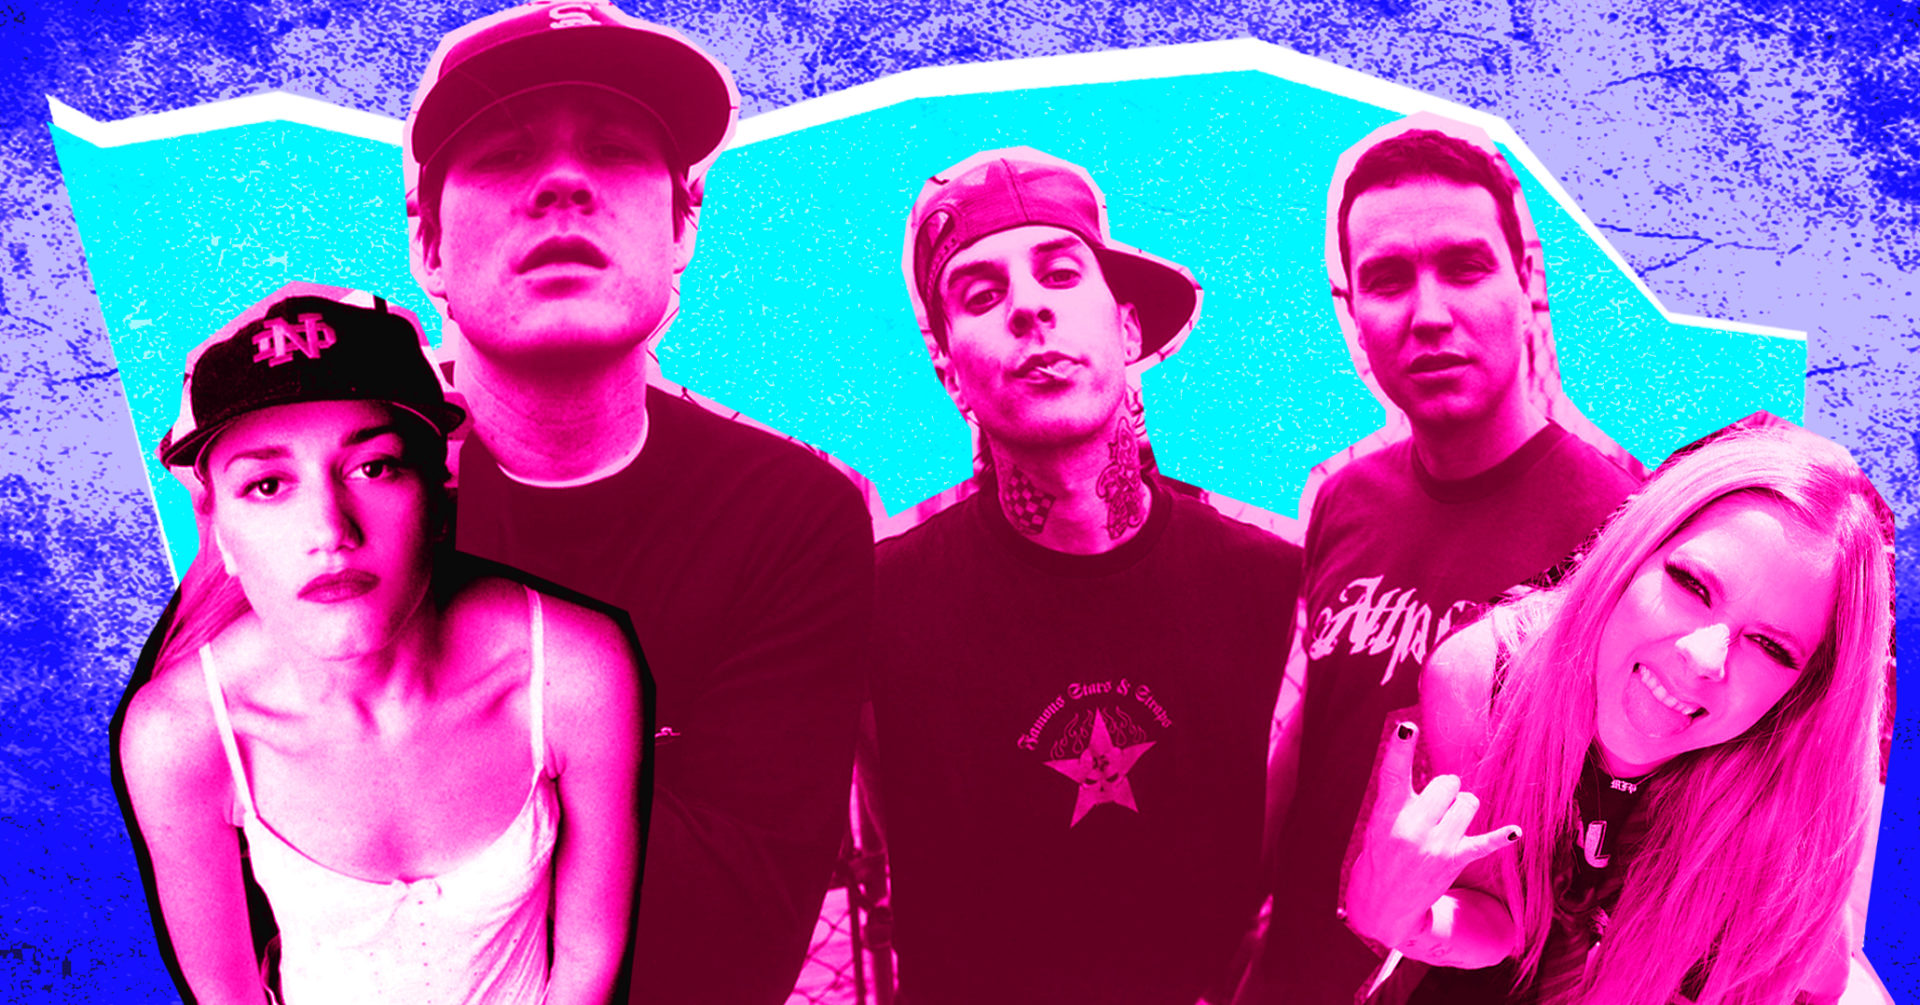 Early 2000s Pop-Punk Artists That Give Us Pangs of Nostalgia